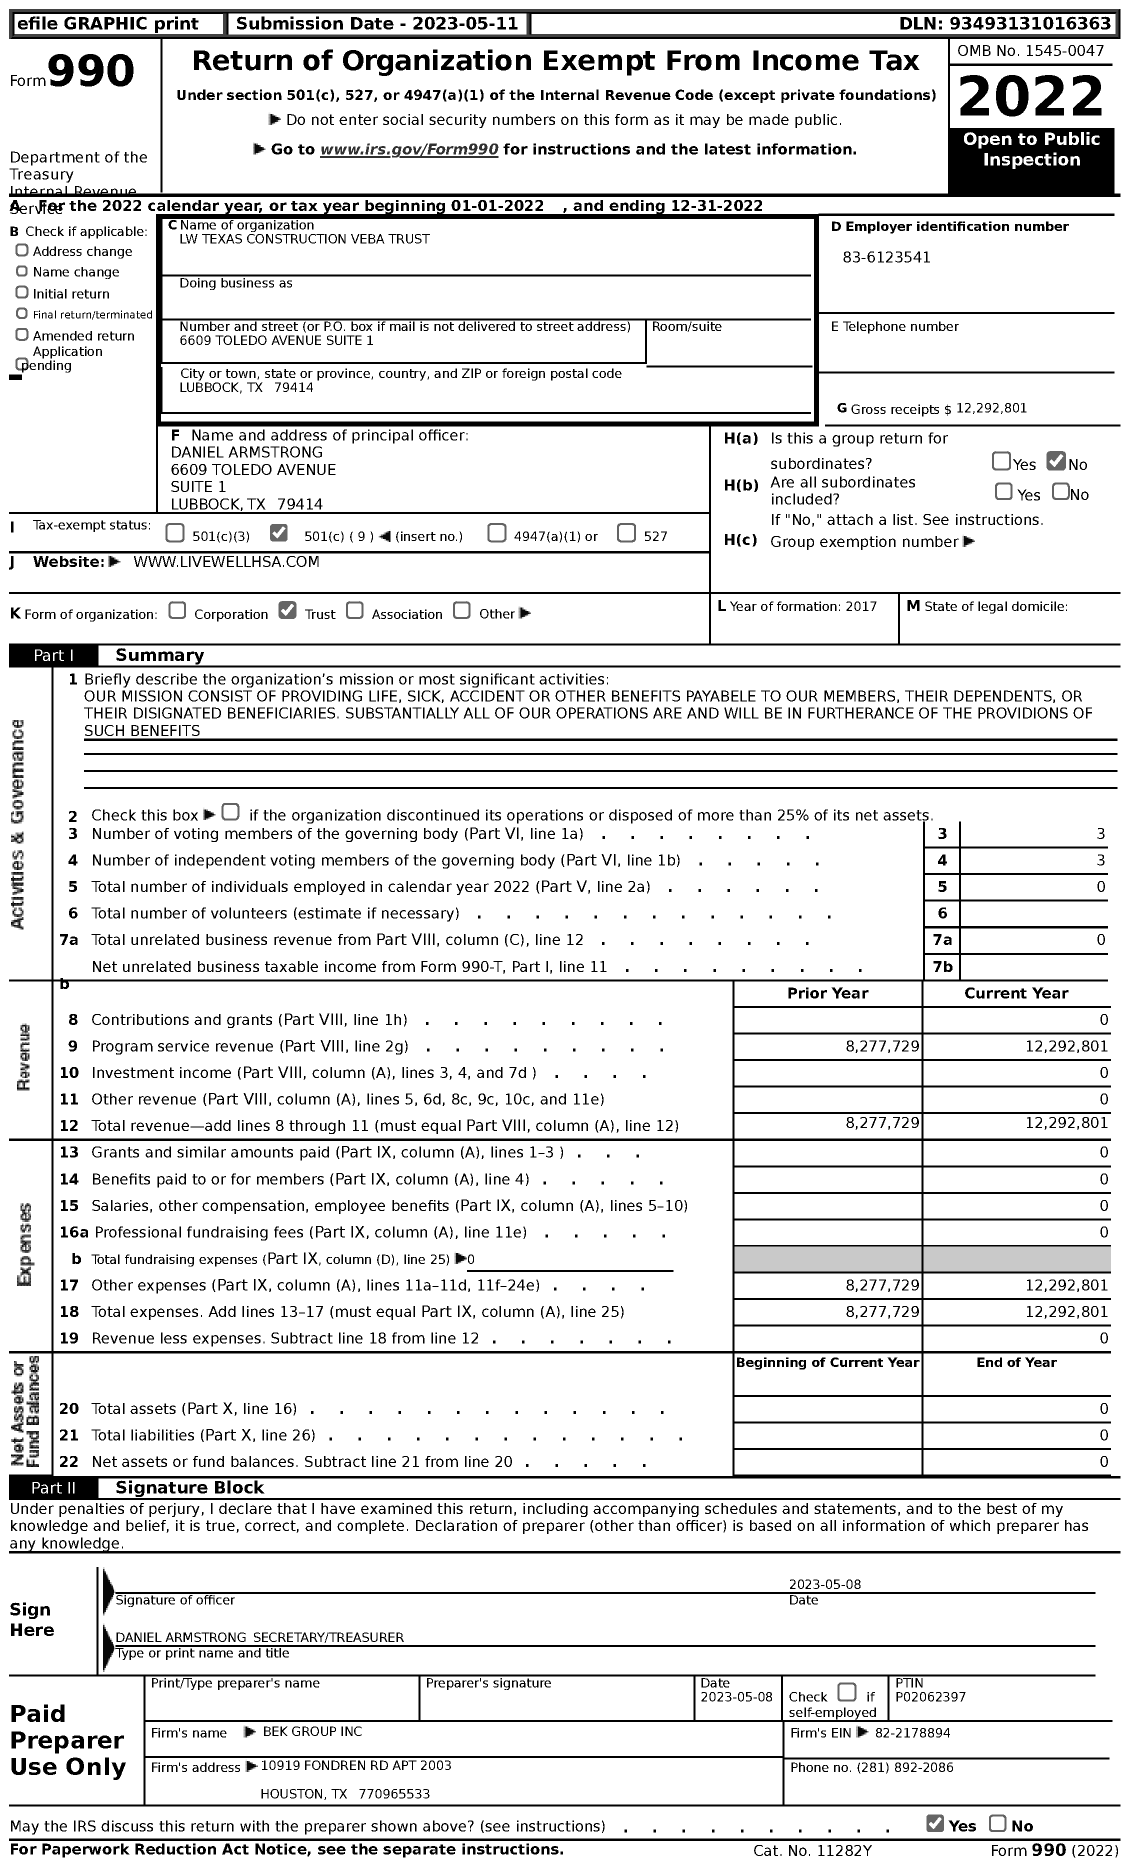 Image of first page of 2022 Form 990 for LW Texas Construction Veba Trust